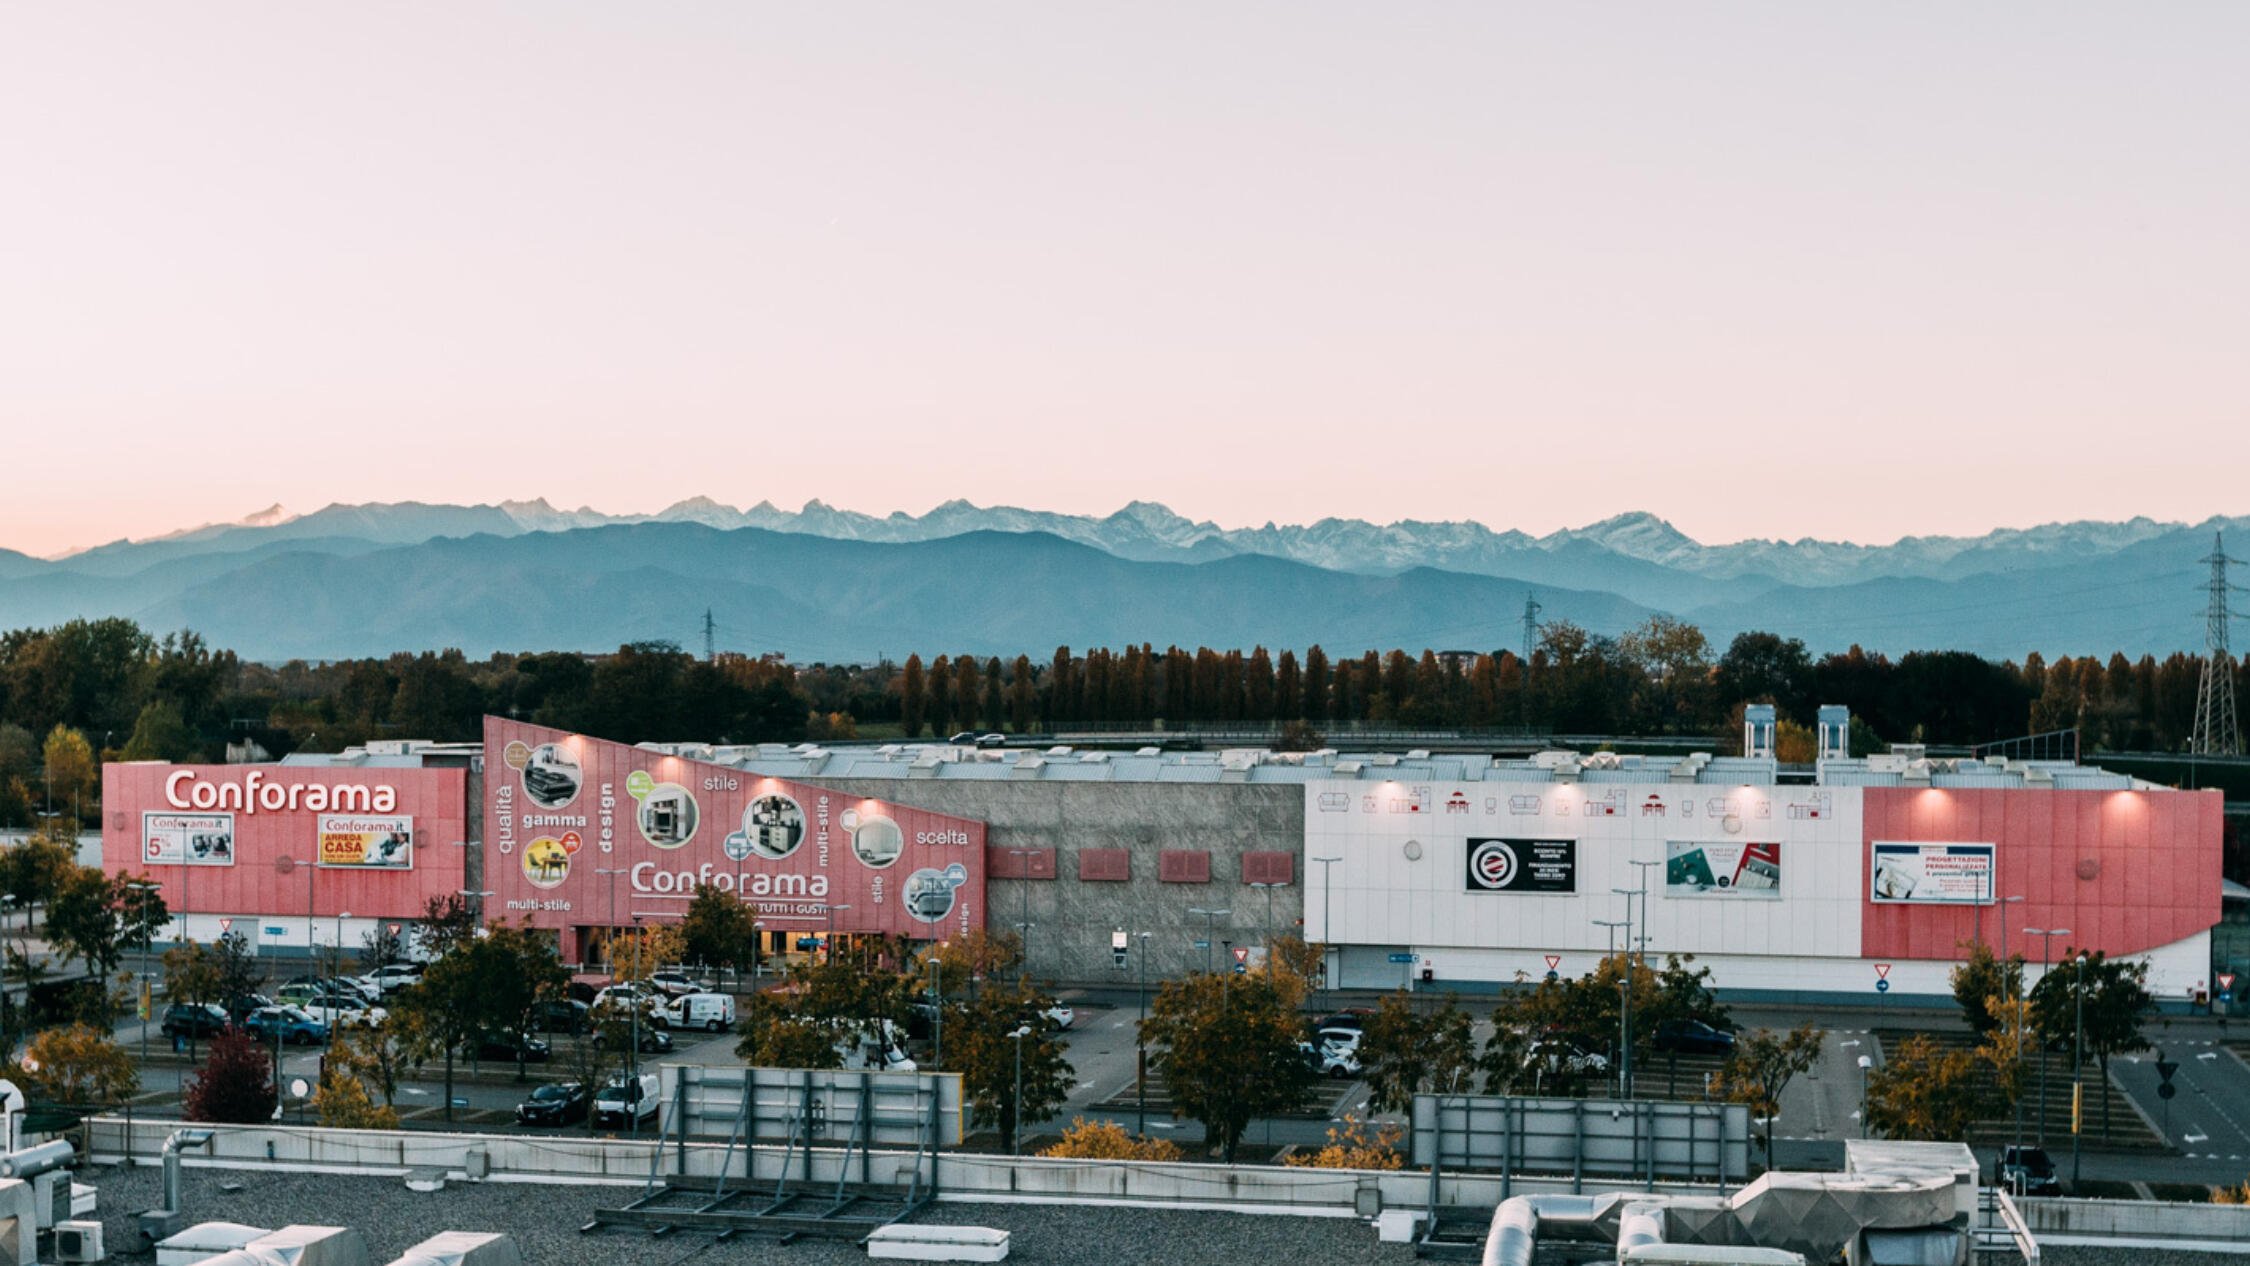 Settimo Cielo at dusk with mountains in background